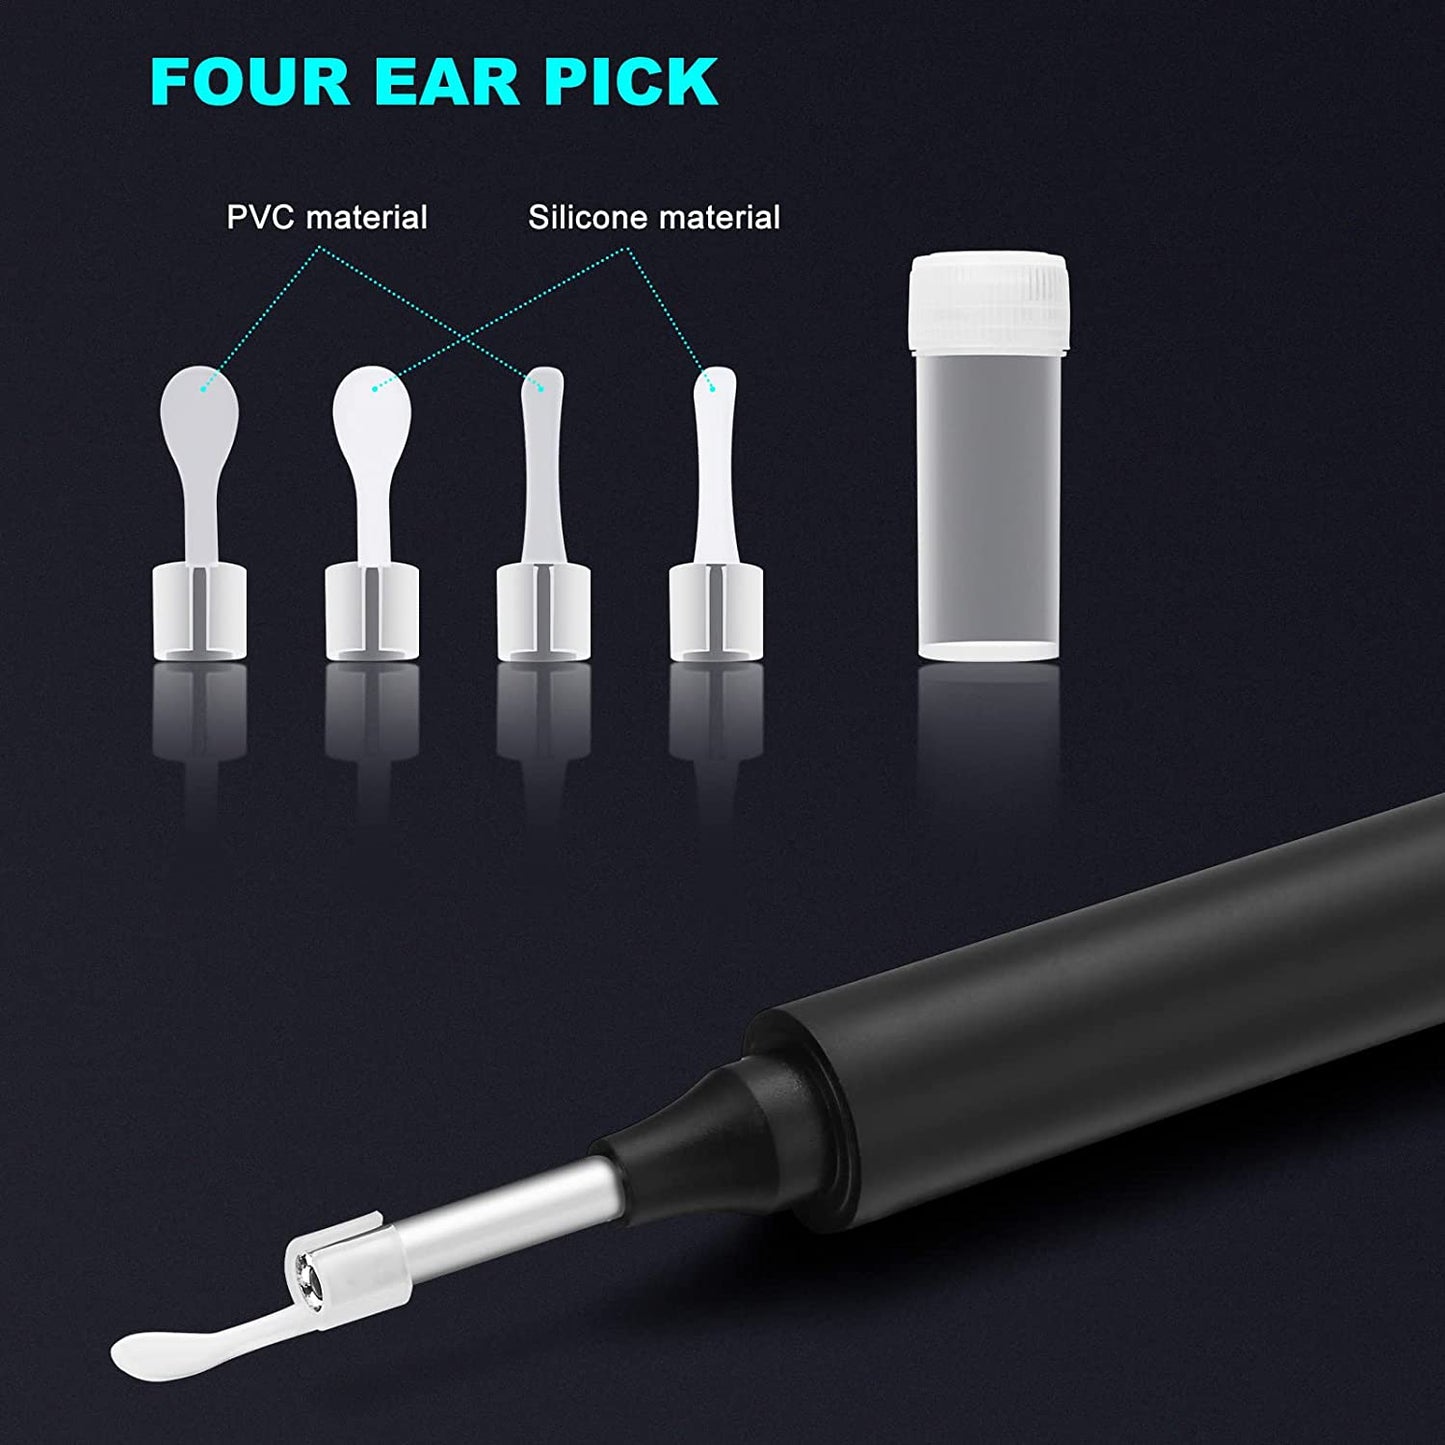 Ear Wax Removal Tool with Camera - Ear Cleaner Kit with 4 Ear Spoon - HD Wifi Visual Ear Wax Remover Kit Compatible Ios/Android - Improves Hearing or Ear Health Naturally for Kids, Adults